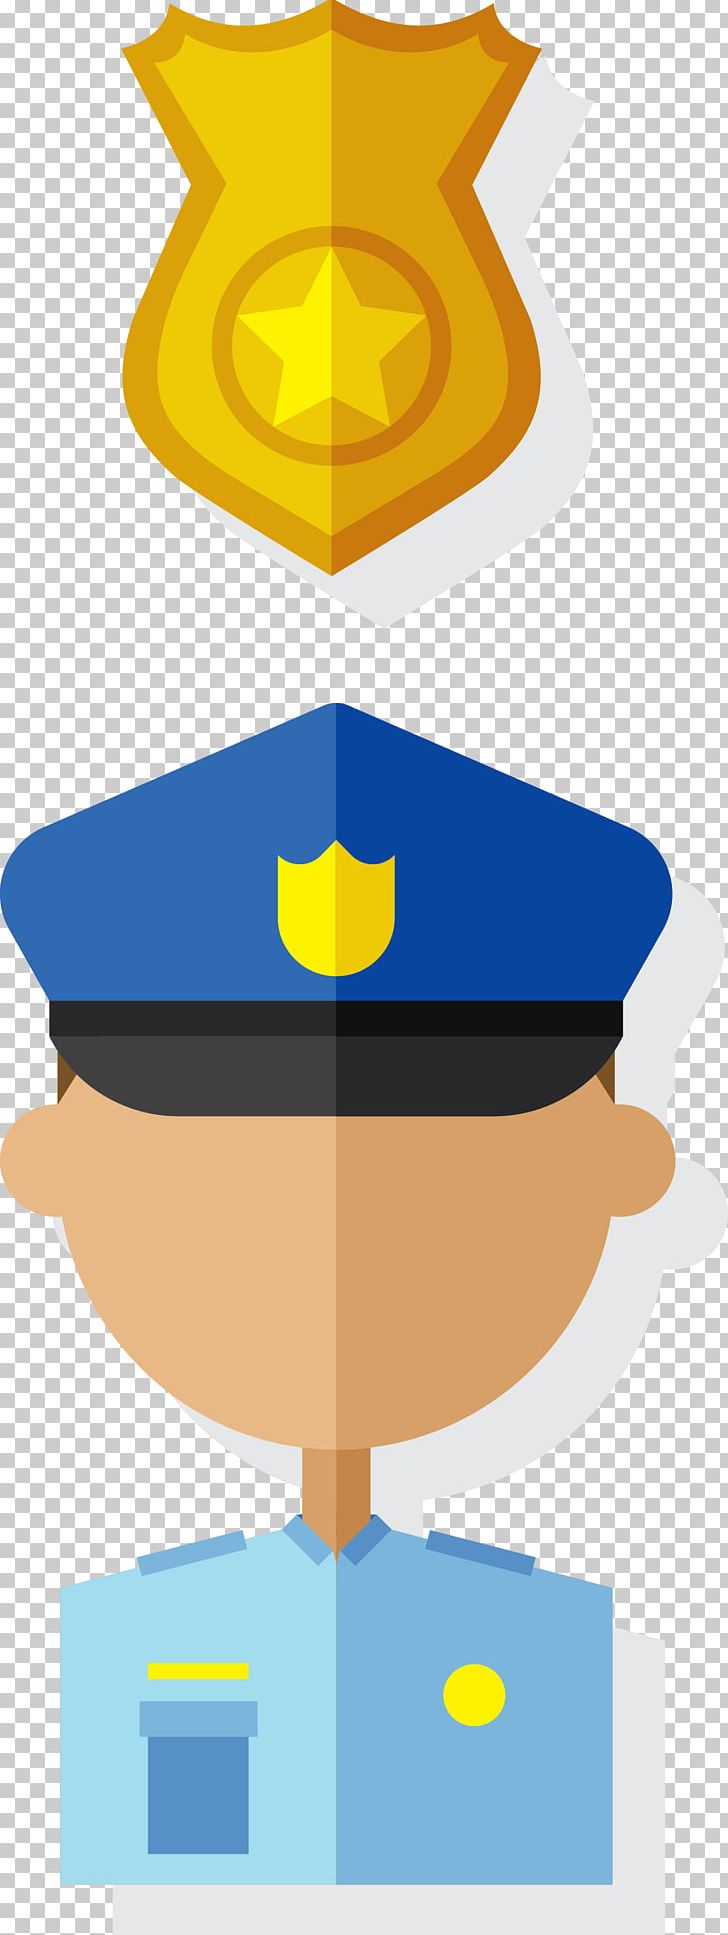 Police Officer Police Car PNG, Clipart, Blue, Cartoon, Detective, Handcuffs, Happy Birthday Vector Images Free PNG Download